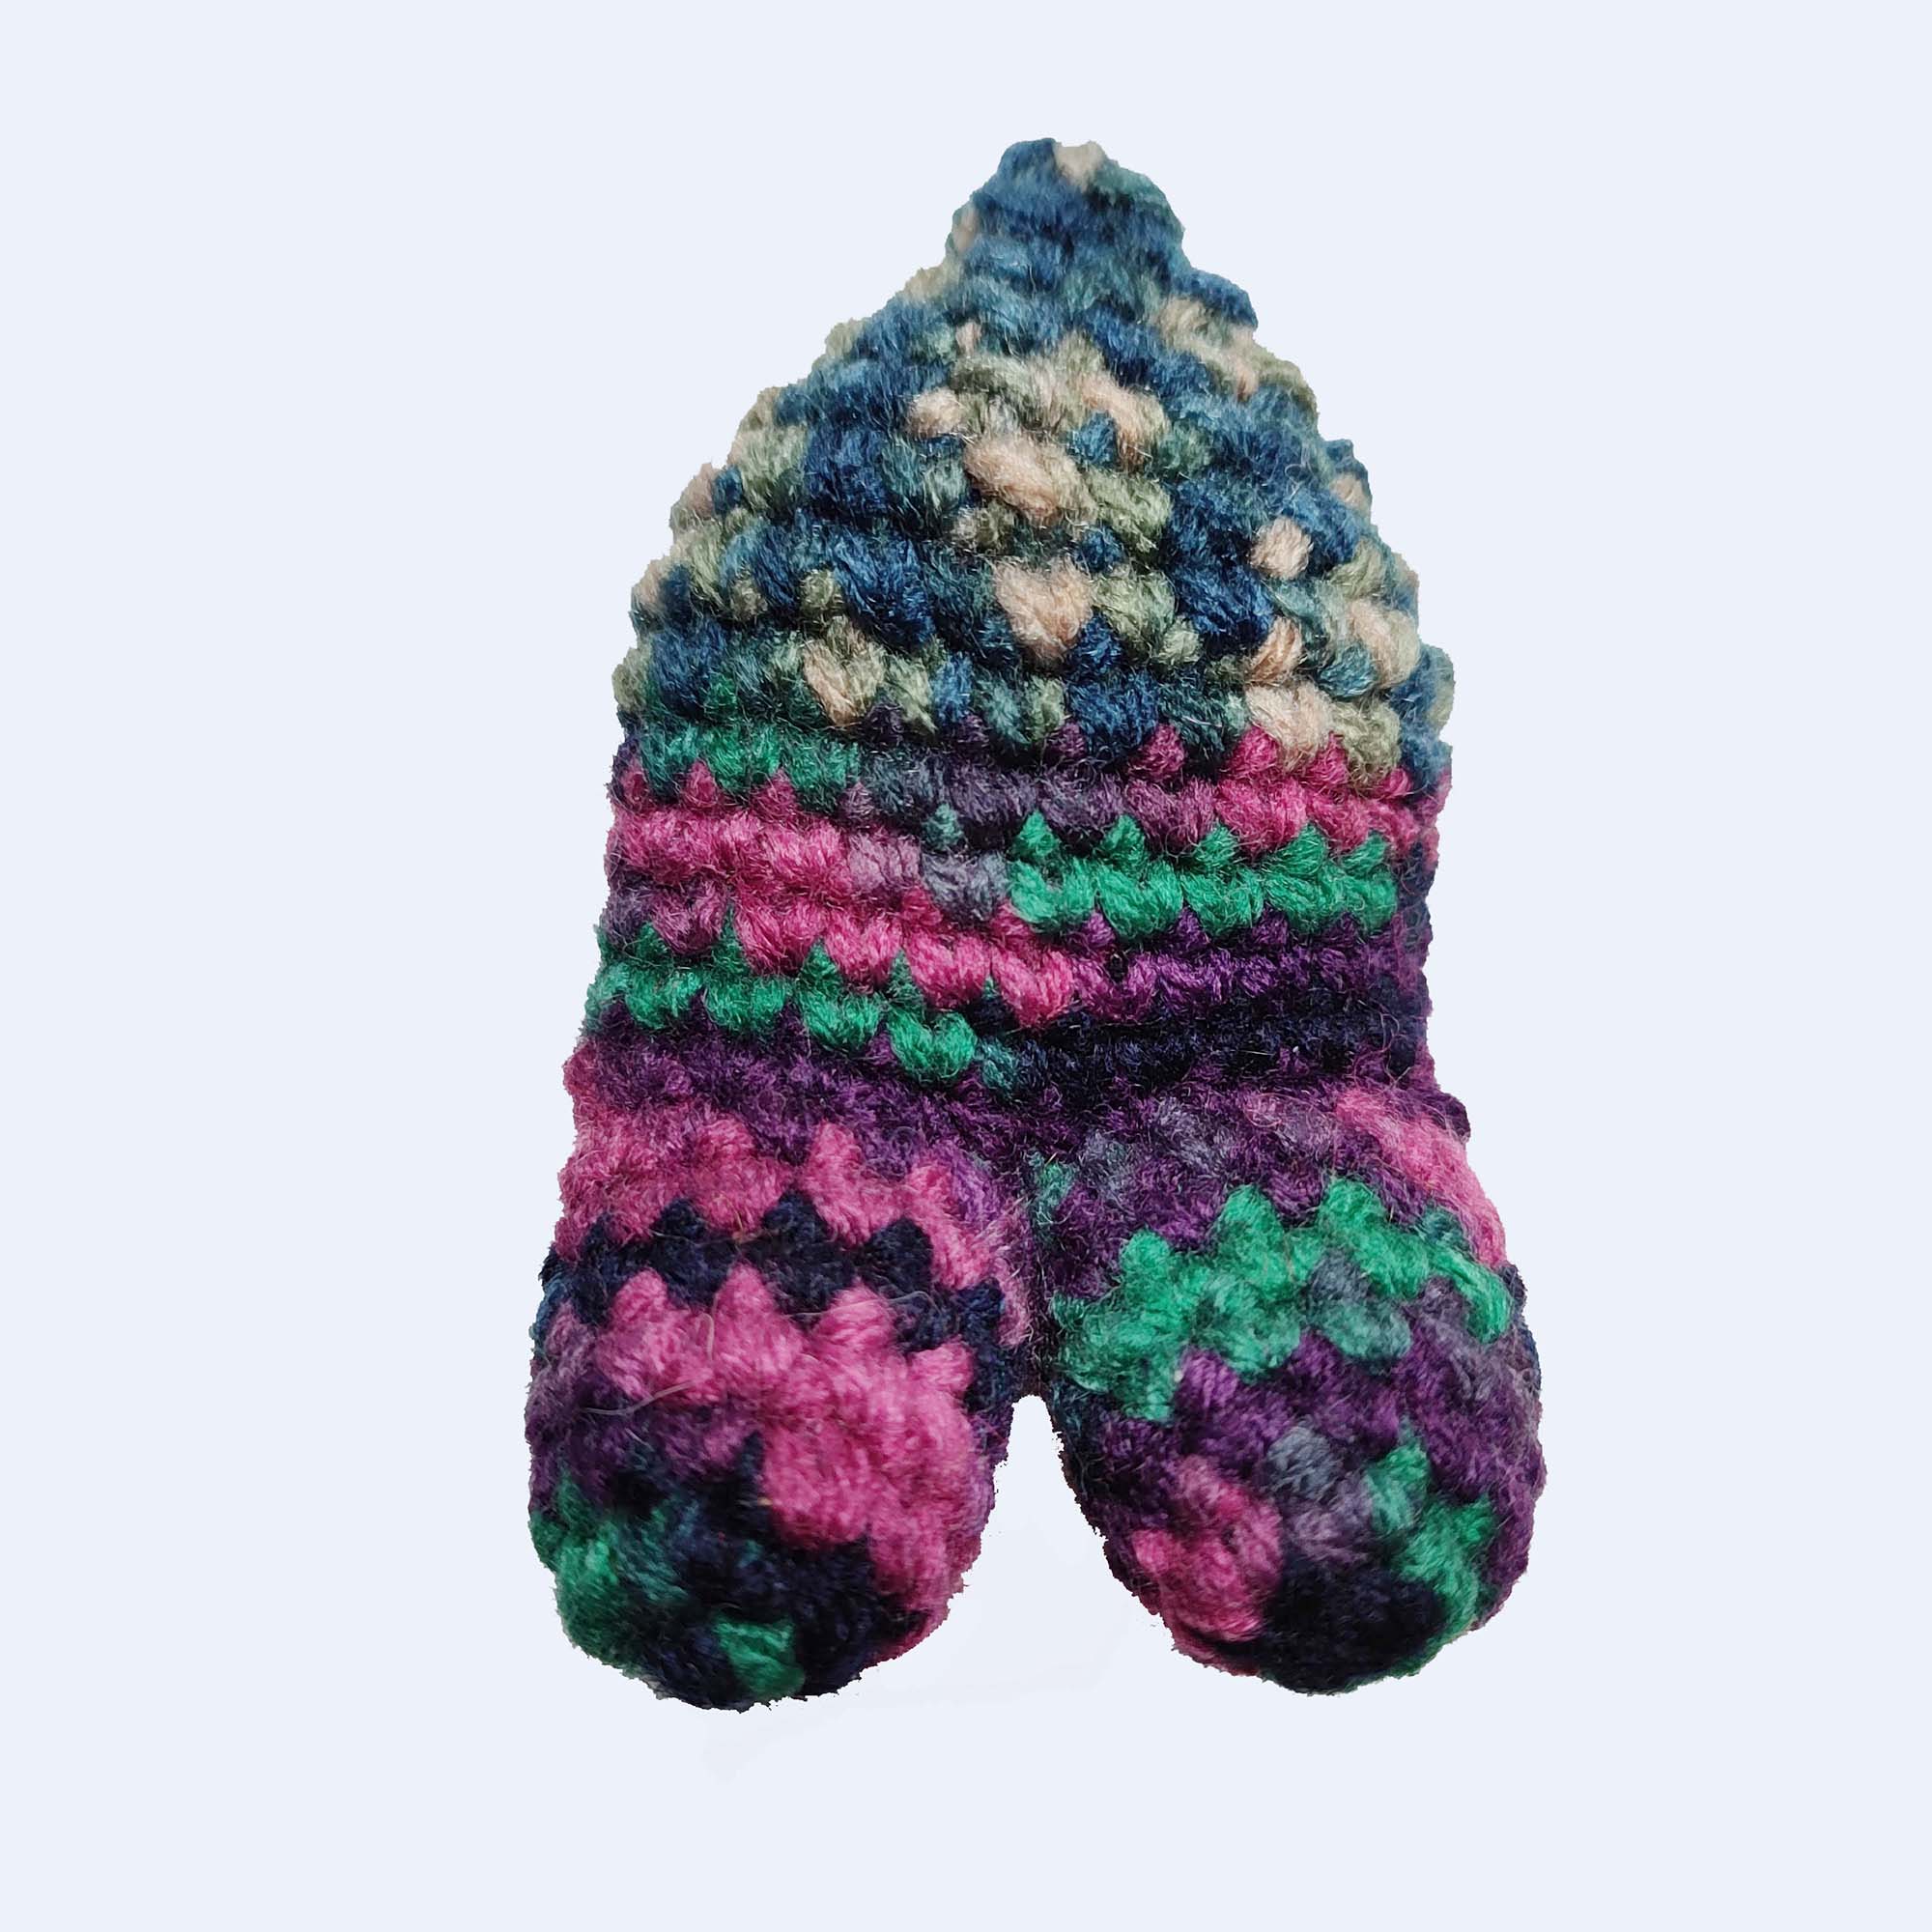 green, blue, pink crocheted nunion toy with four legs